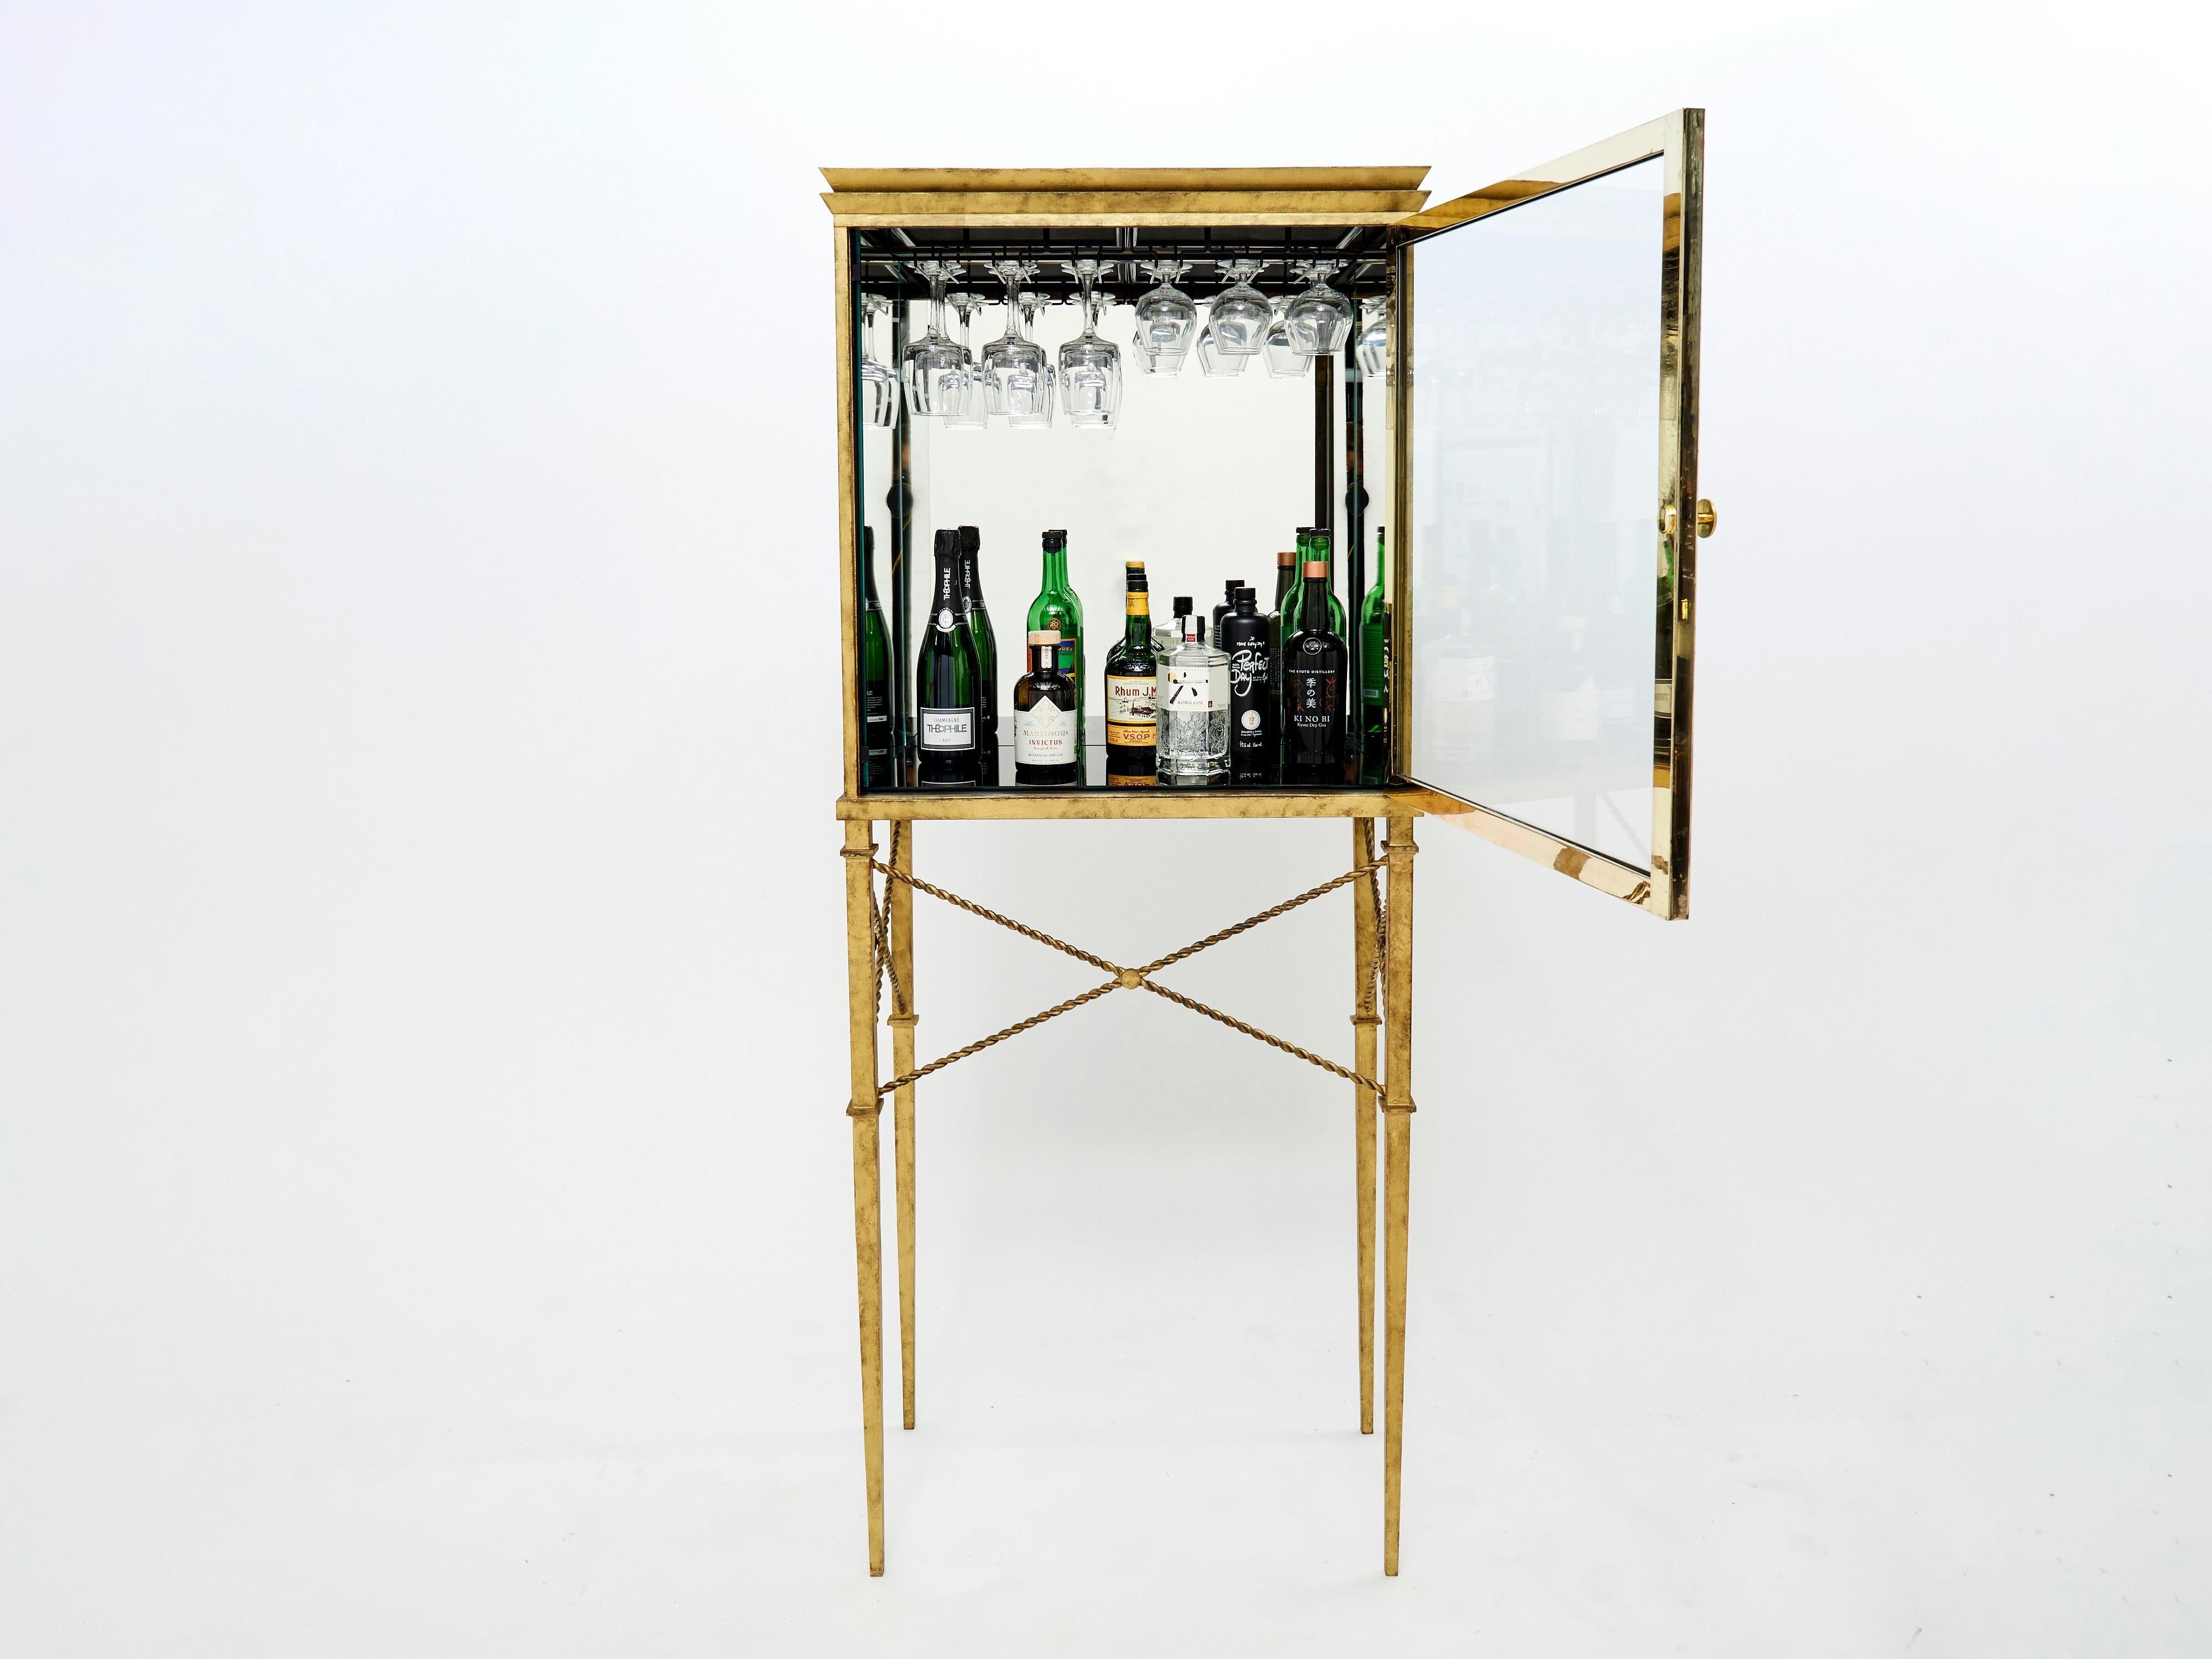 A unique French Art deco vitrine bar cabinet produced in the 1920s. The wrought iron feet are glittering in an antiqued gold gilt finish, with beautiful details, while the mirrored vitrine cabinet part gives the piece a glam twist. Its sophisticated